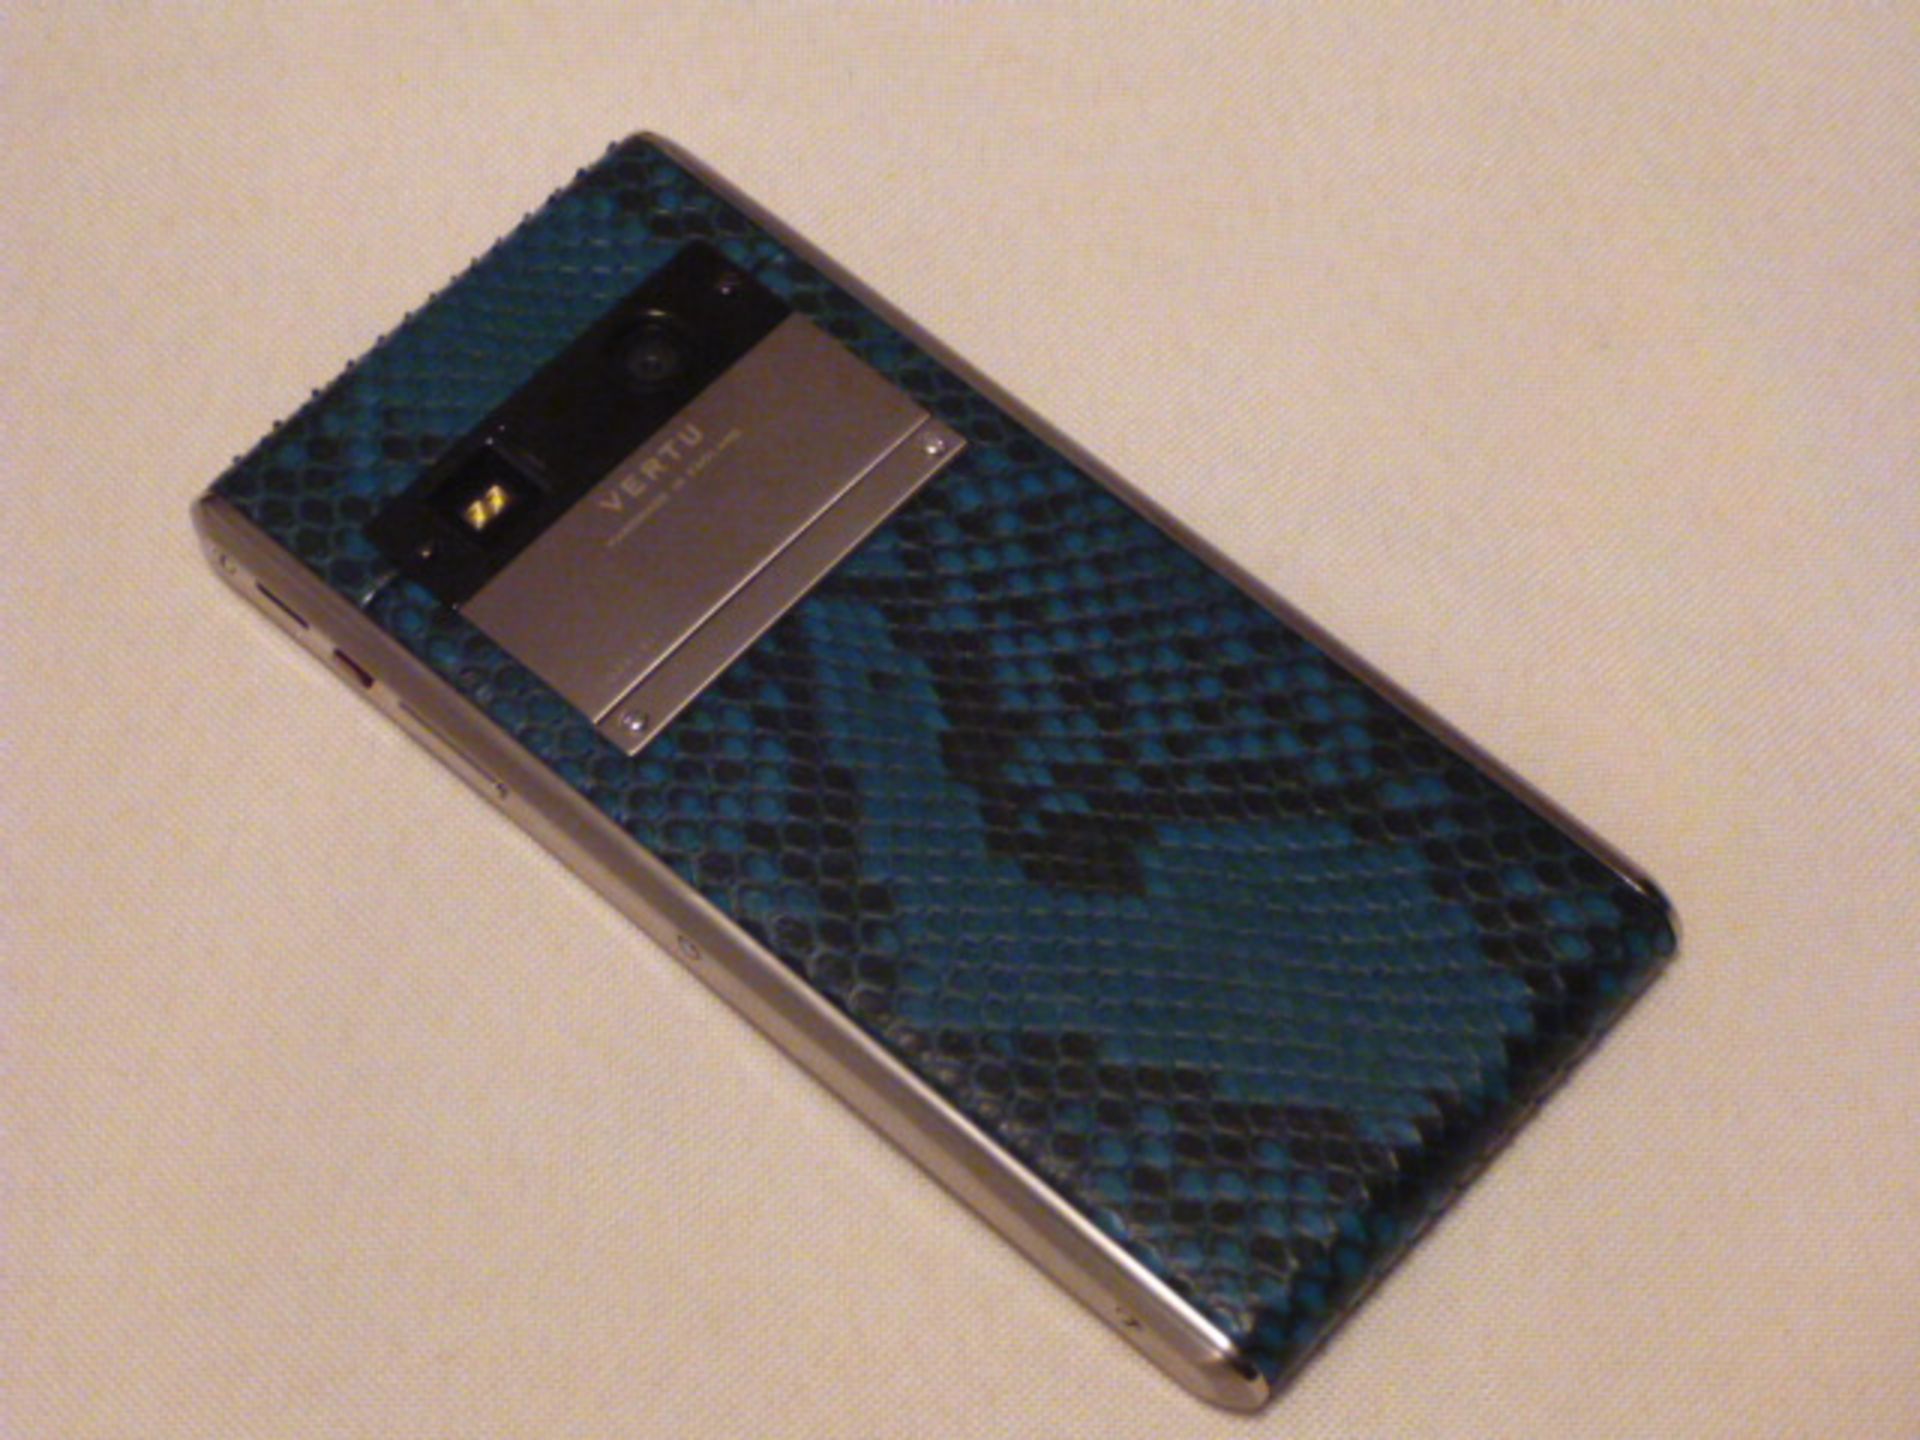 Vertu Aster Touch Phone, Emerald Python Skin Back. S/N 1-032131. Comes with Sales Pack, Charging - Image 2 of 2